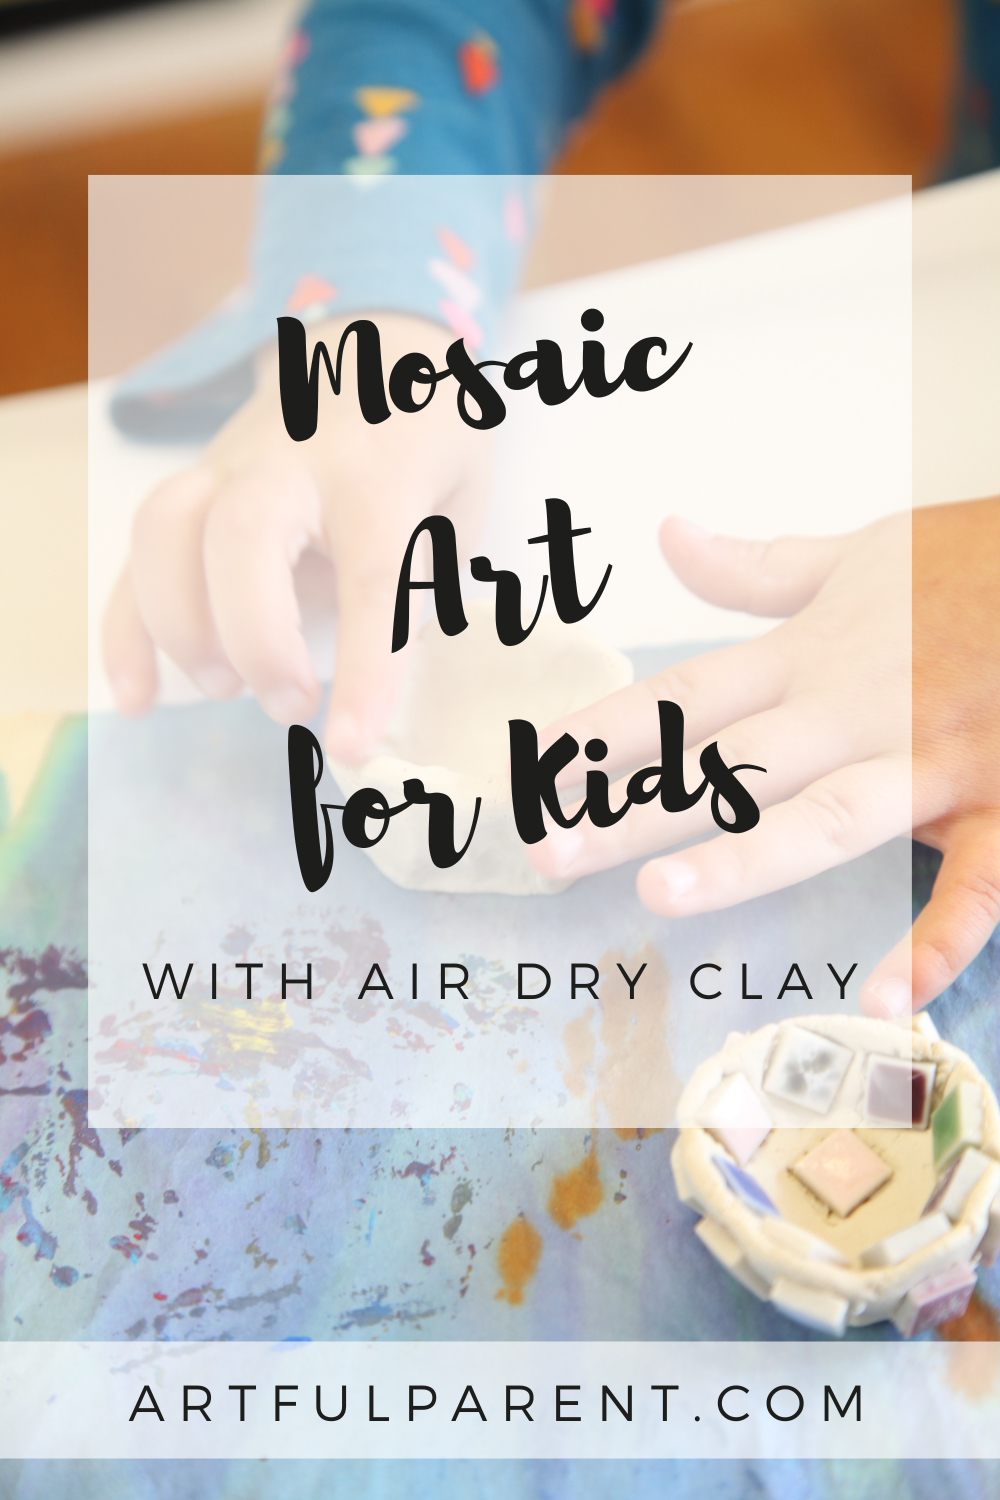 How to Make Mosaic Art for Kids with Air Dry Clay